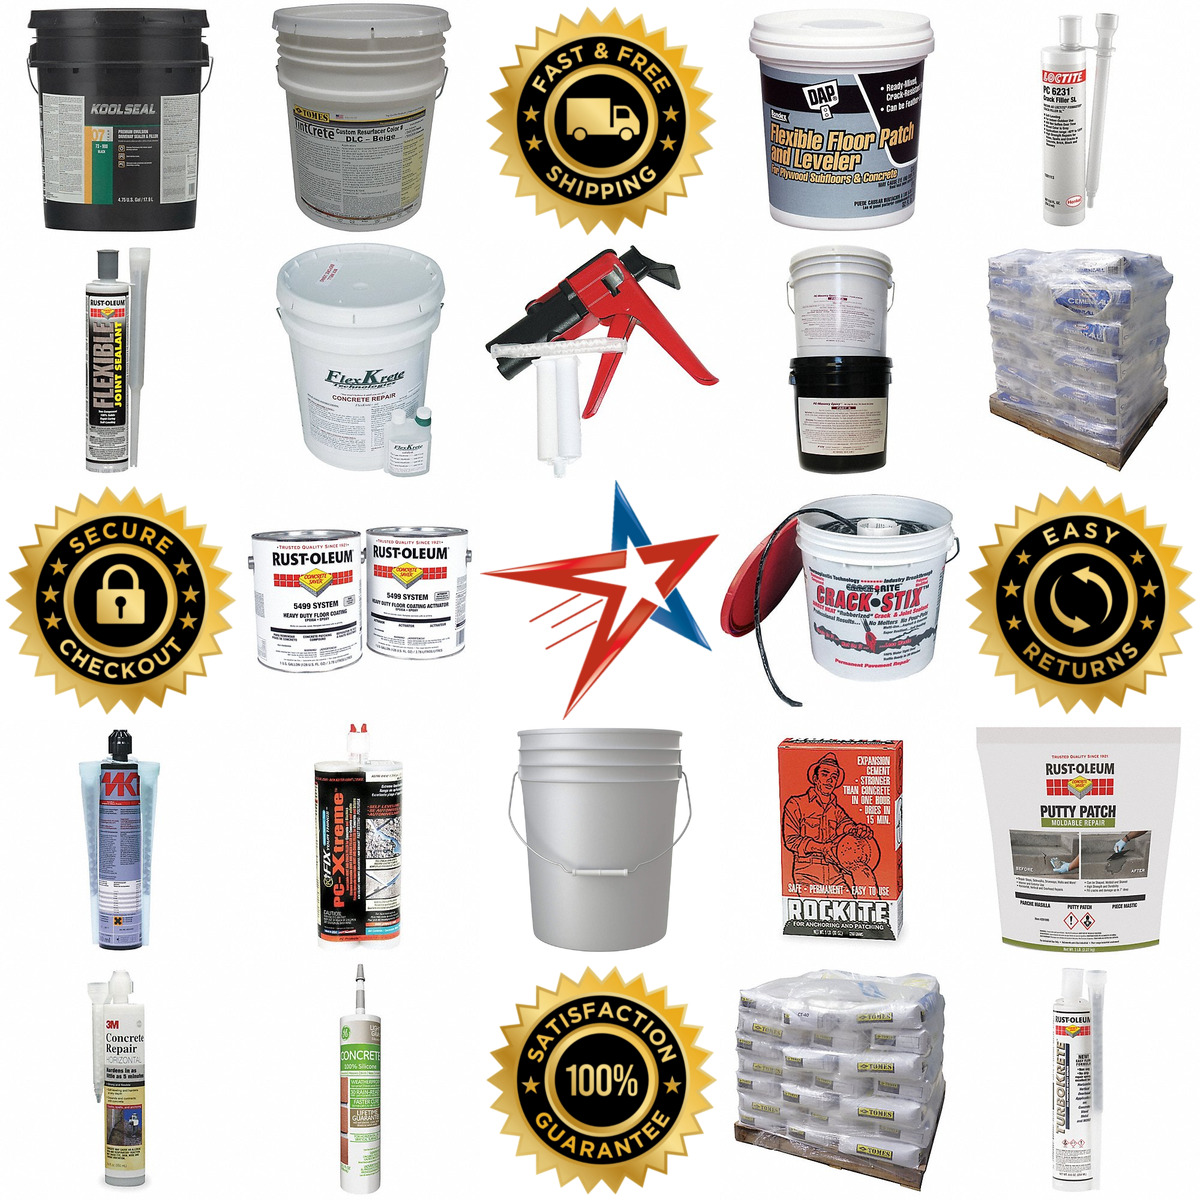 A selection of Concrete Asphalt and Masonry products on GoVets